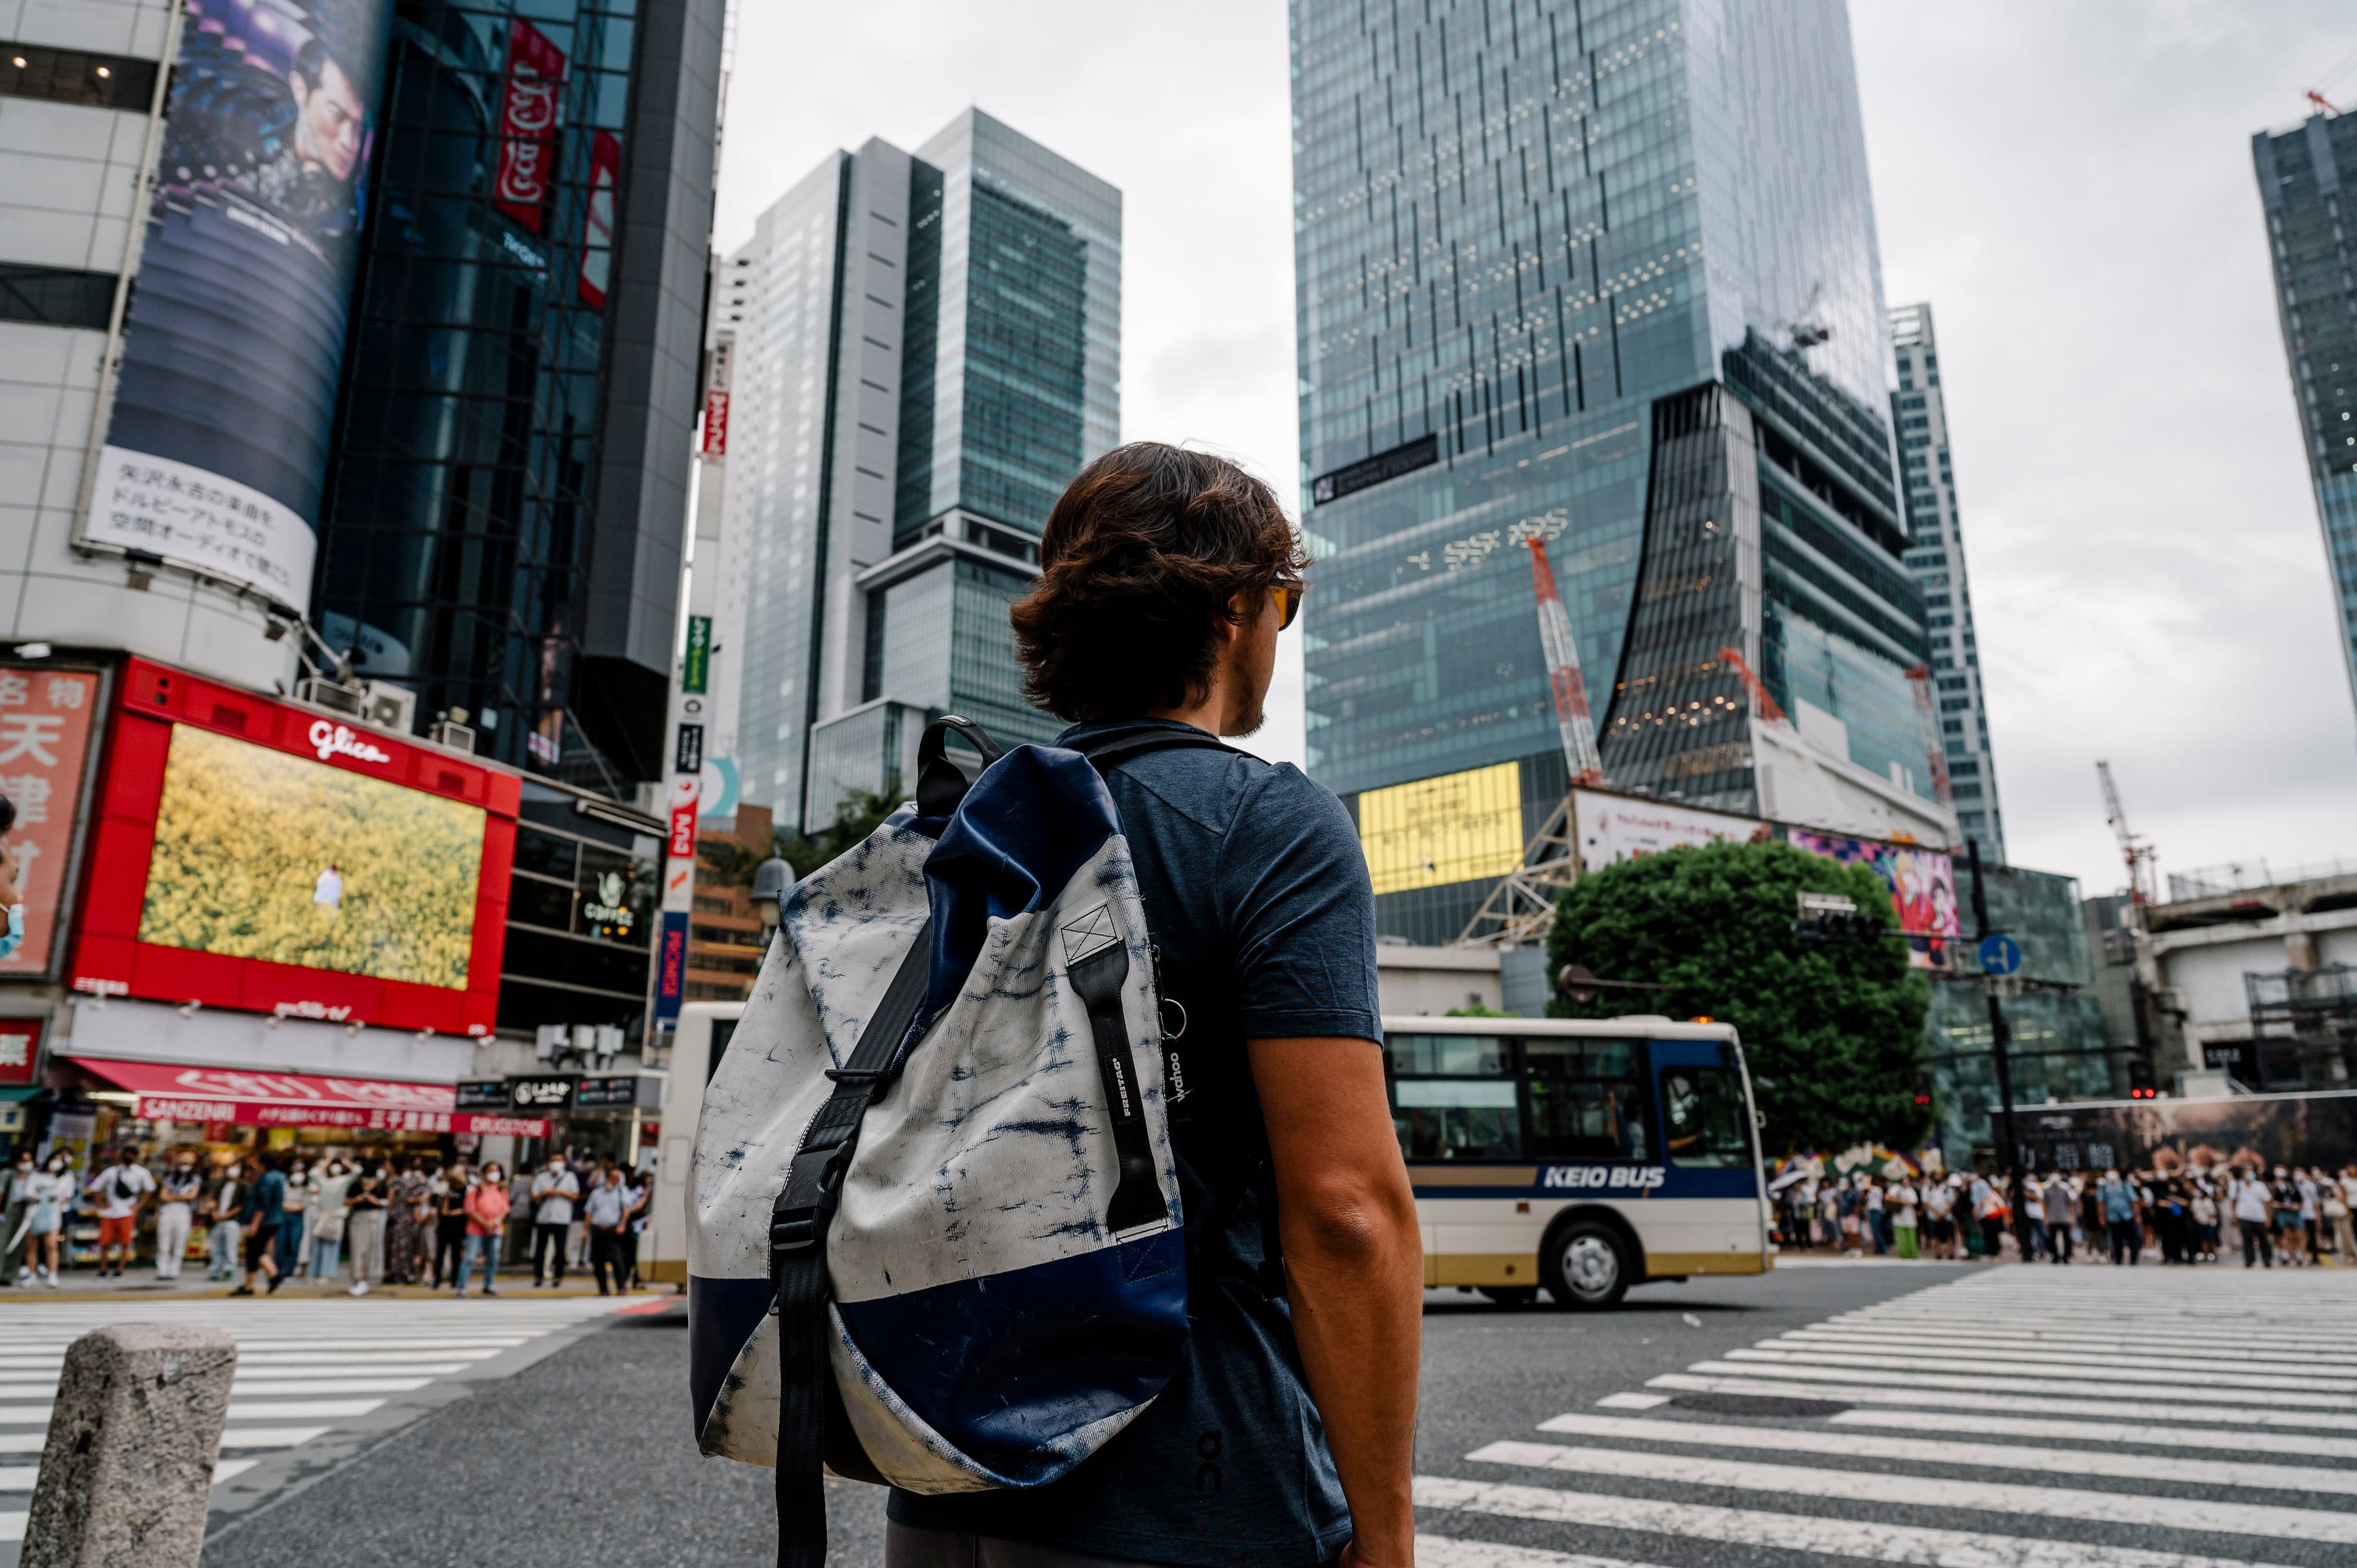 Man wearing backpack looking out into a busy crosswalk